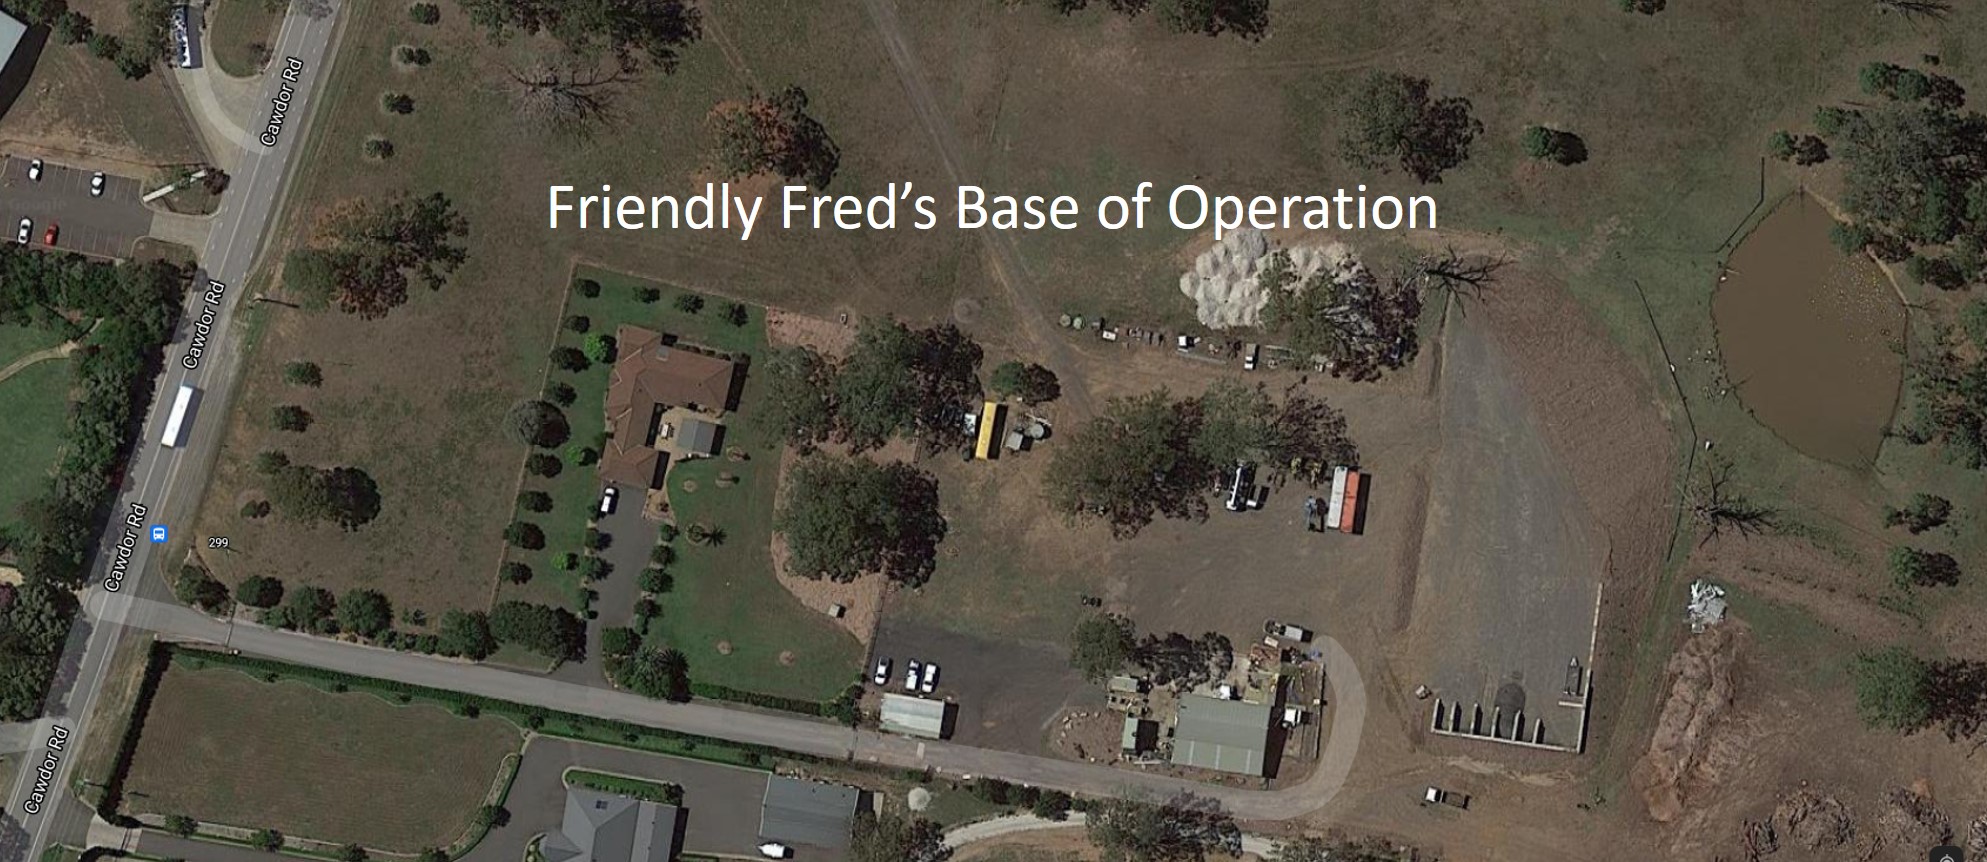 Friendly Fred's base of operations